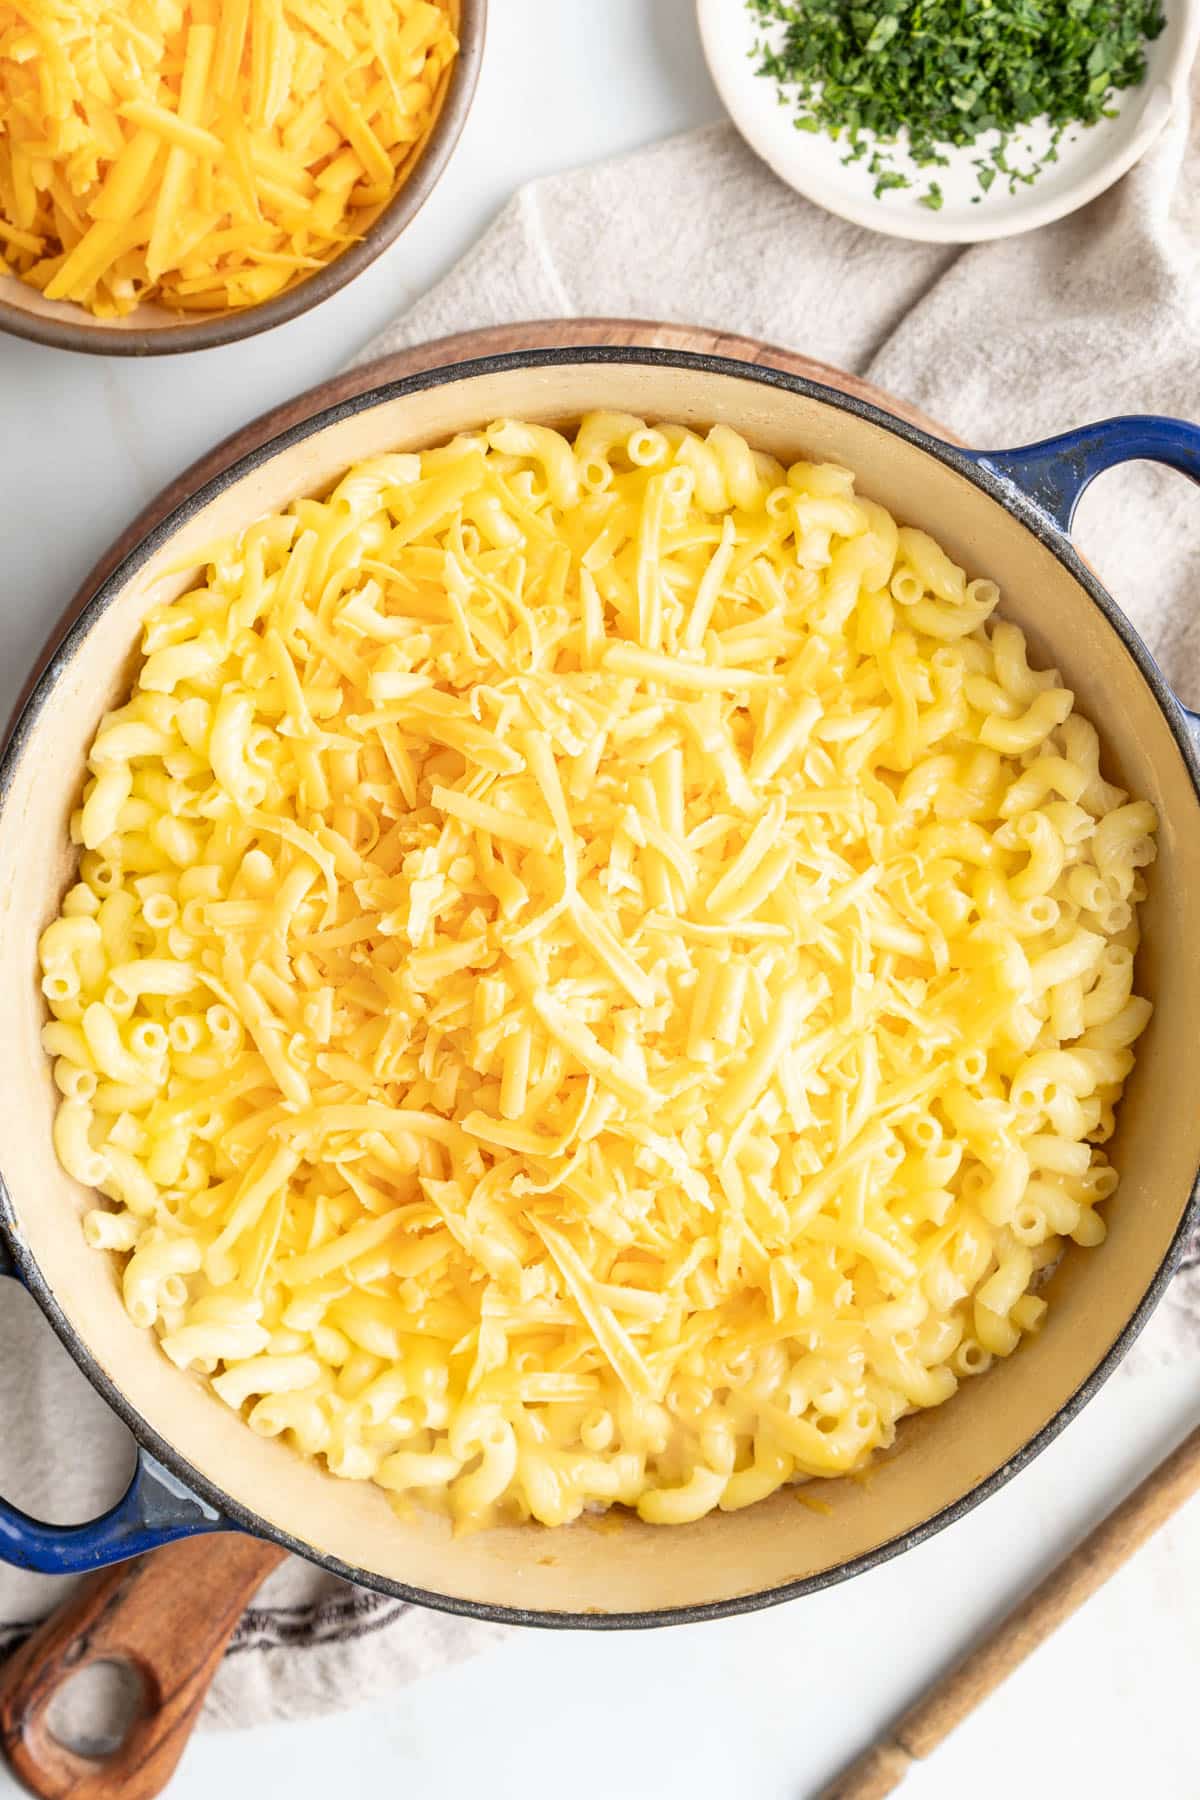 Add shredded cheese to the noodles.